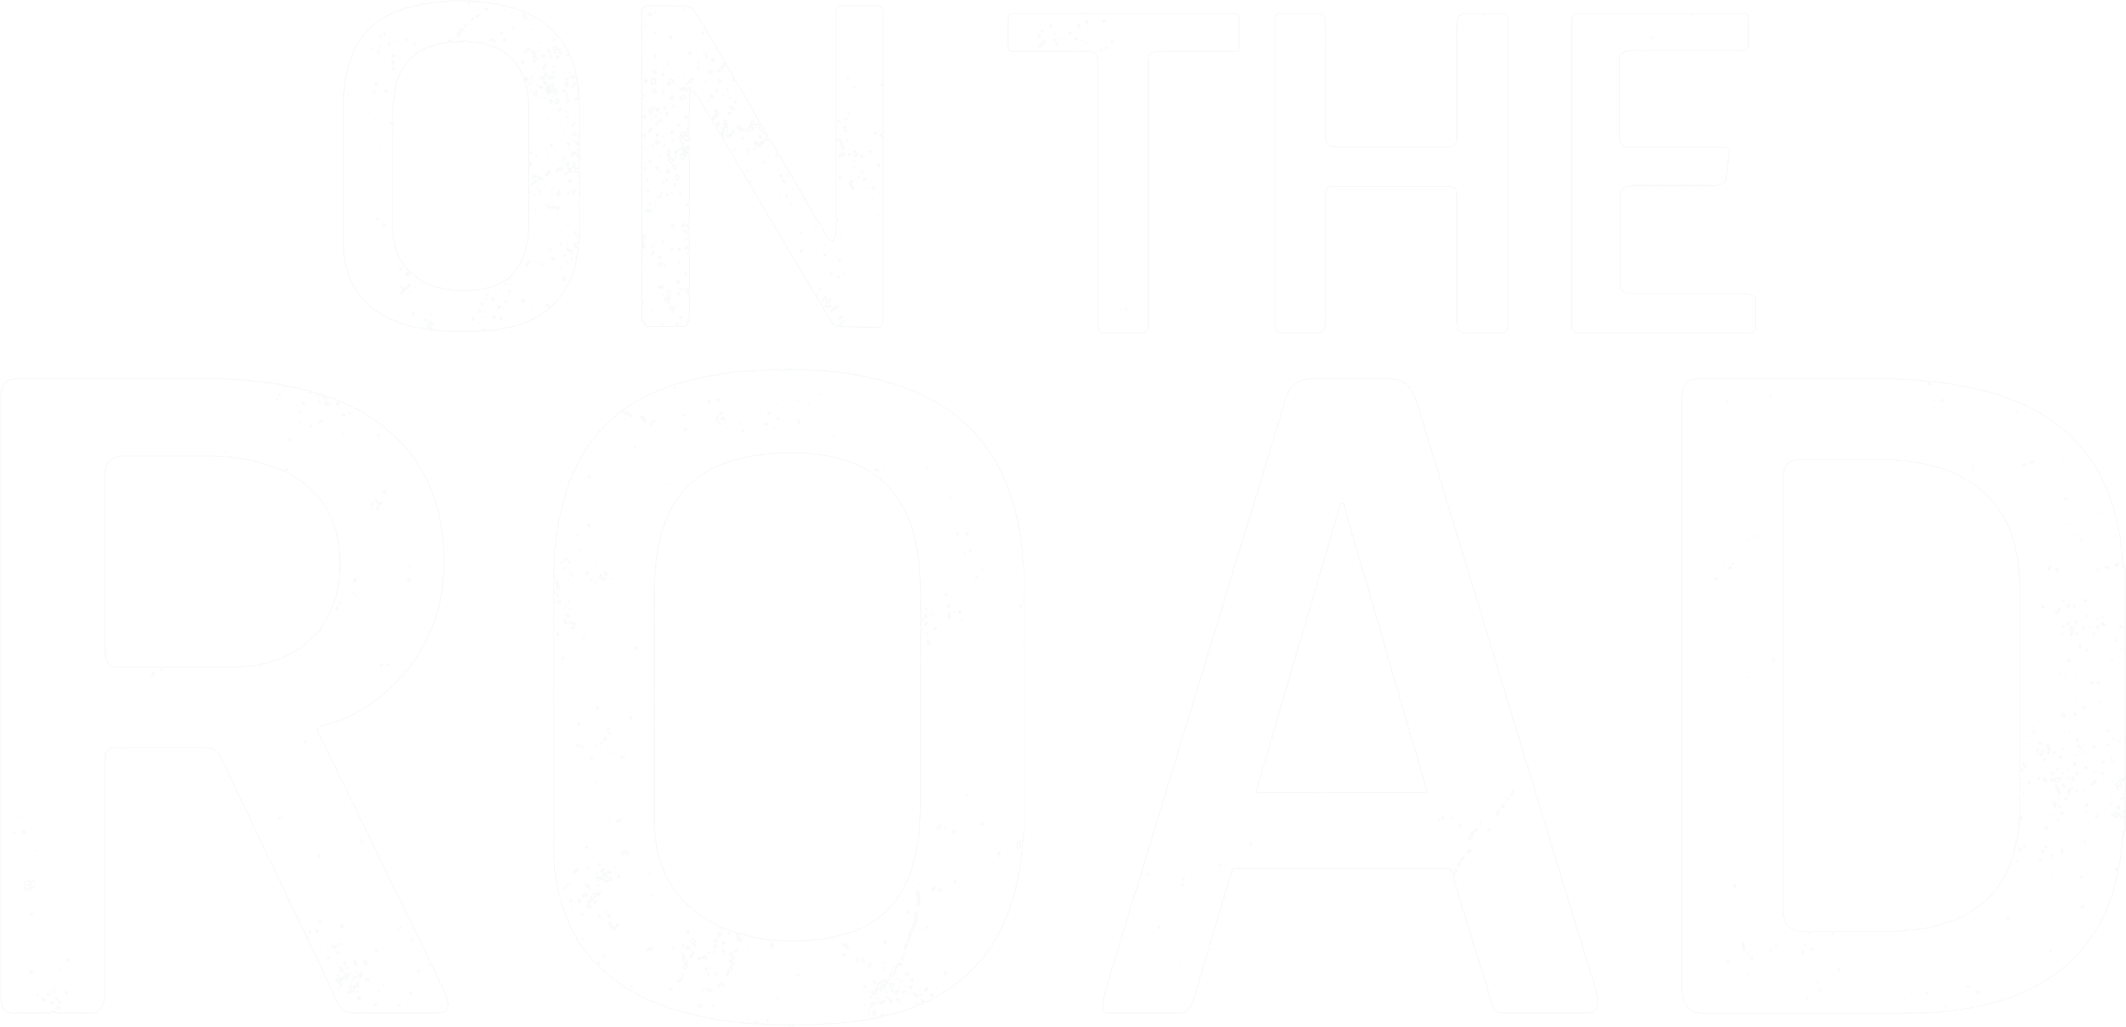 On the Road logo